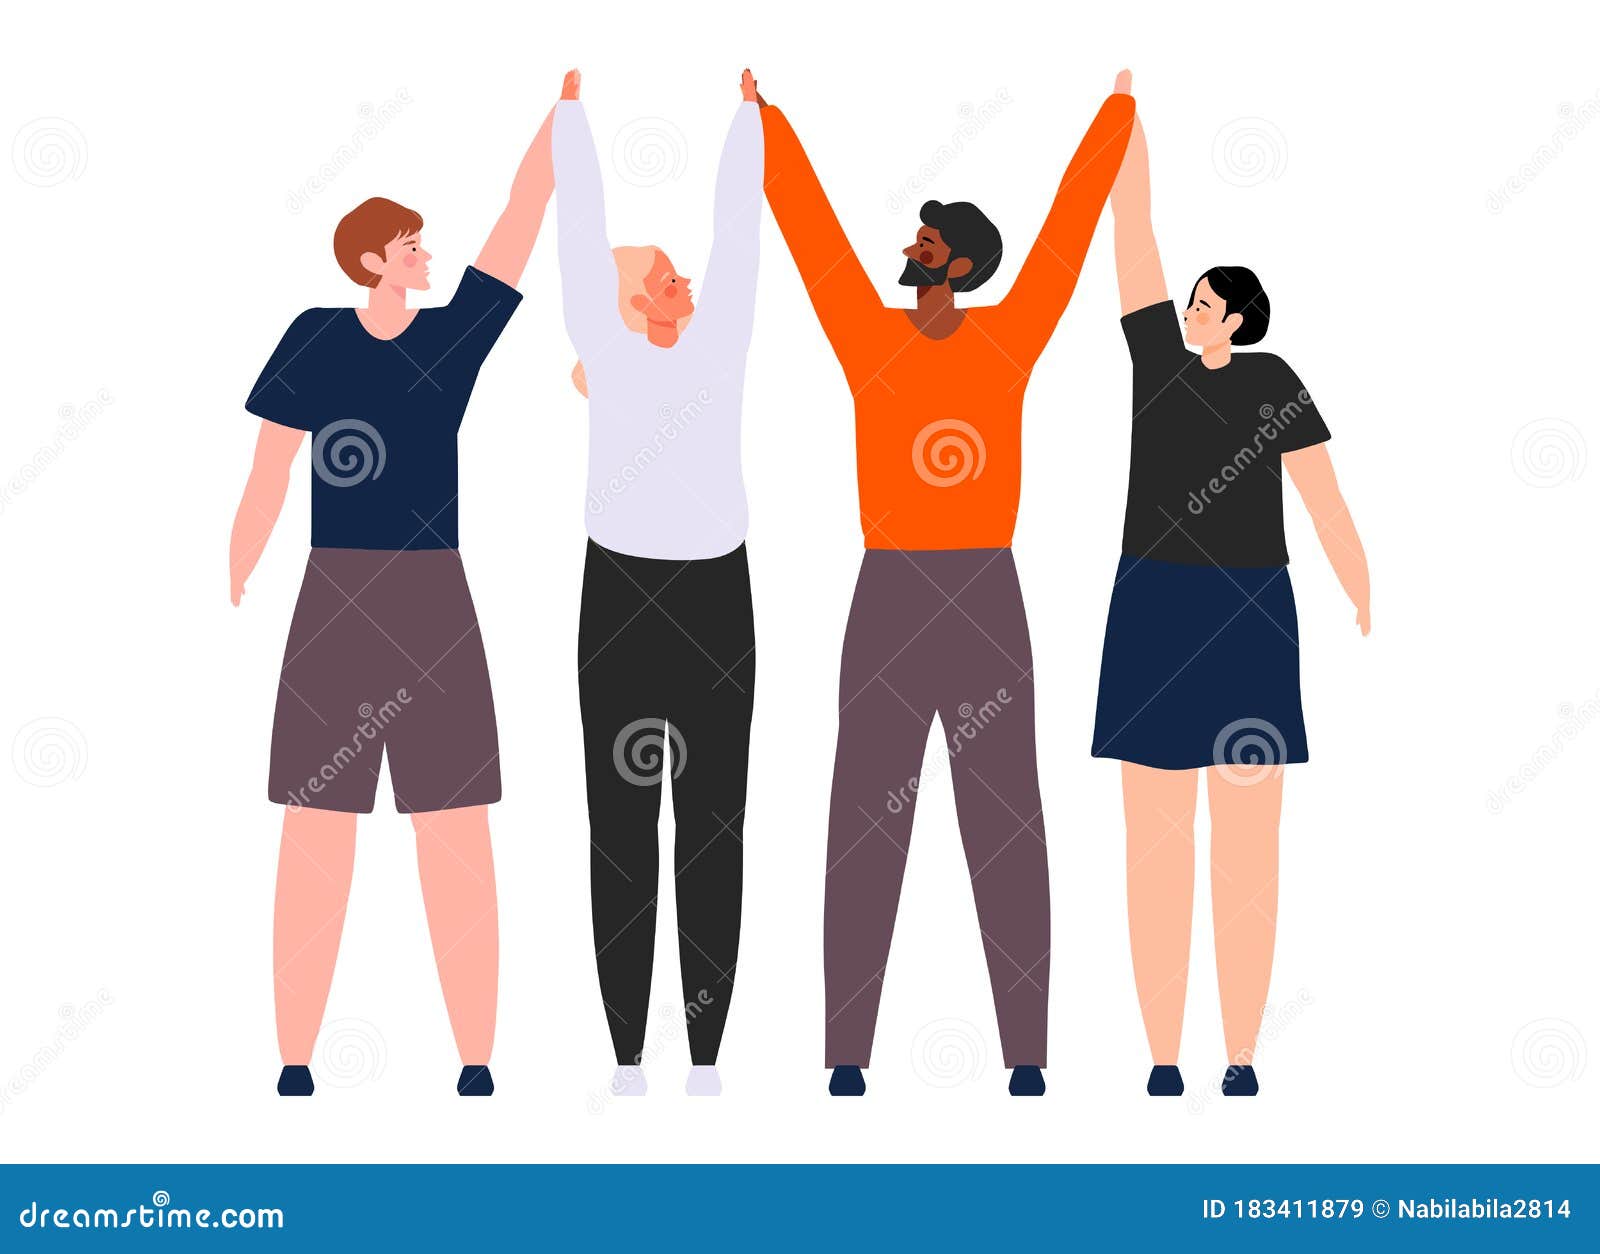 Young Man and and Women are Holding and Raising Their Hands Cartoon  Illustration. Smiling Men and Women Holding Hands Stock Vector -  Illustration of cheerful, happy: 183411879